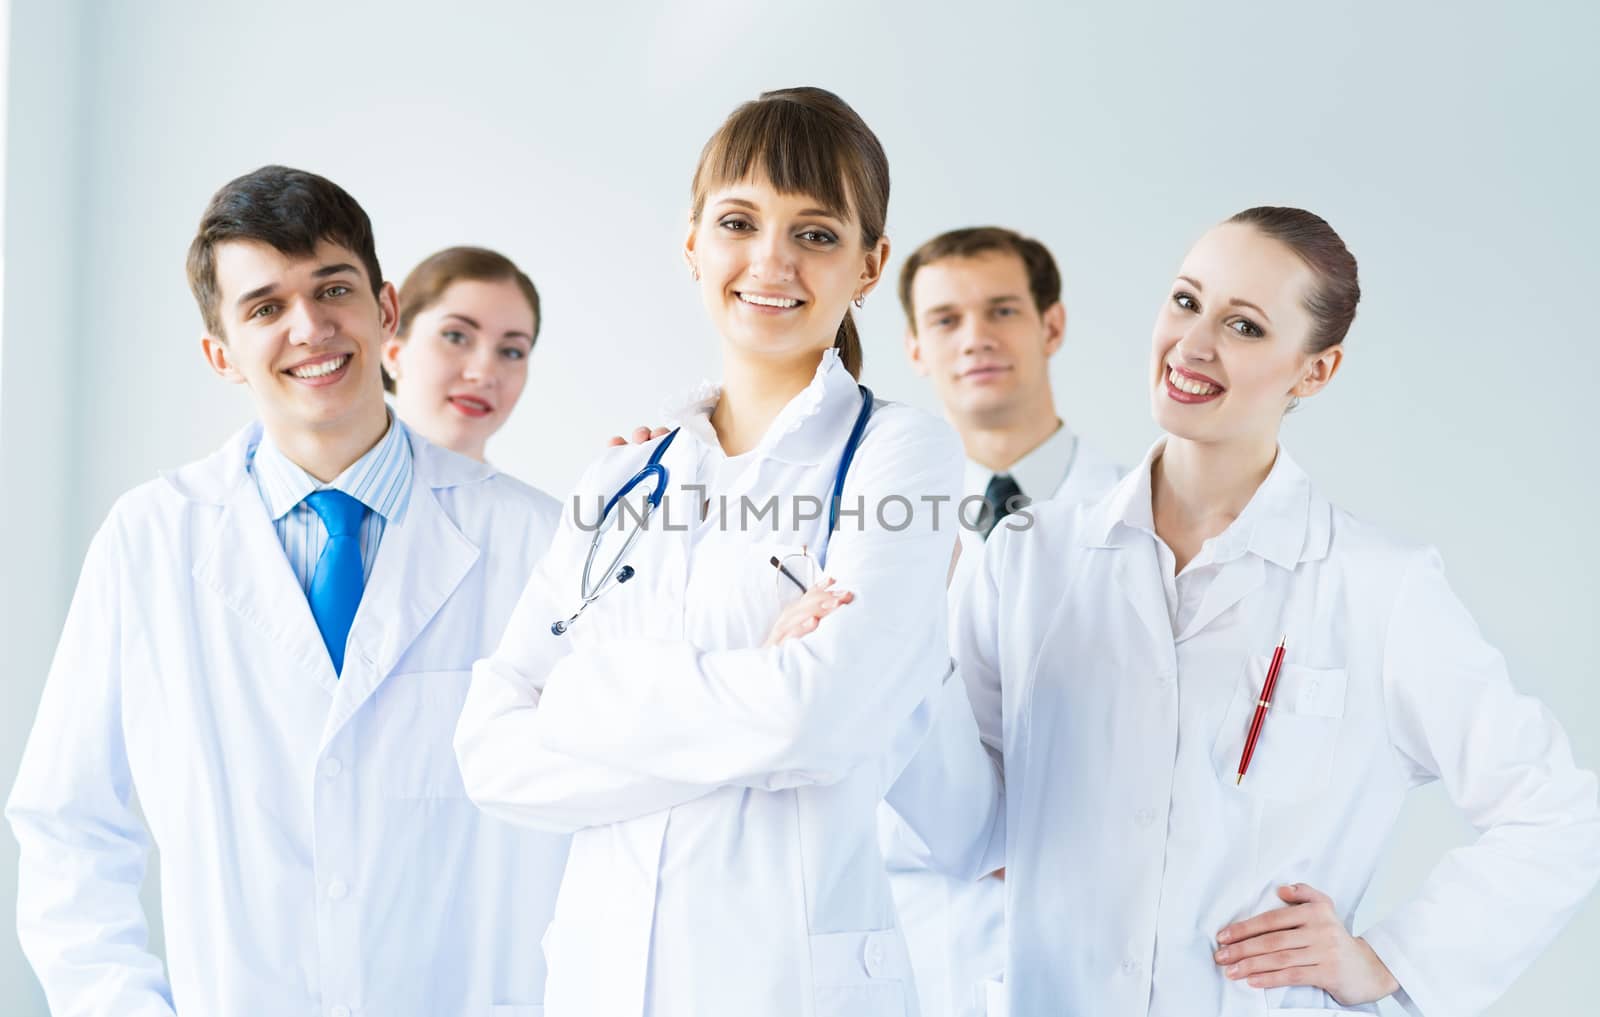 team of experienced highly qualified doctors, fold one's arms